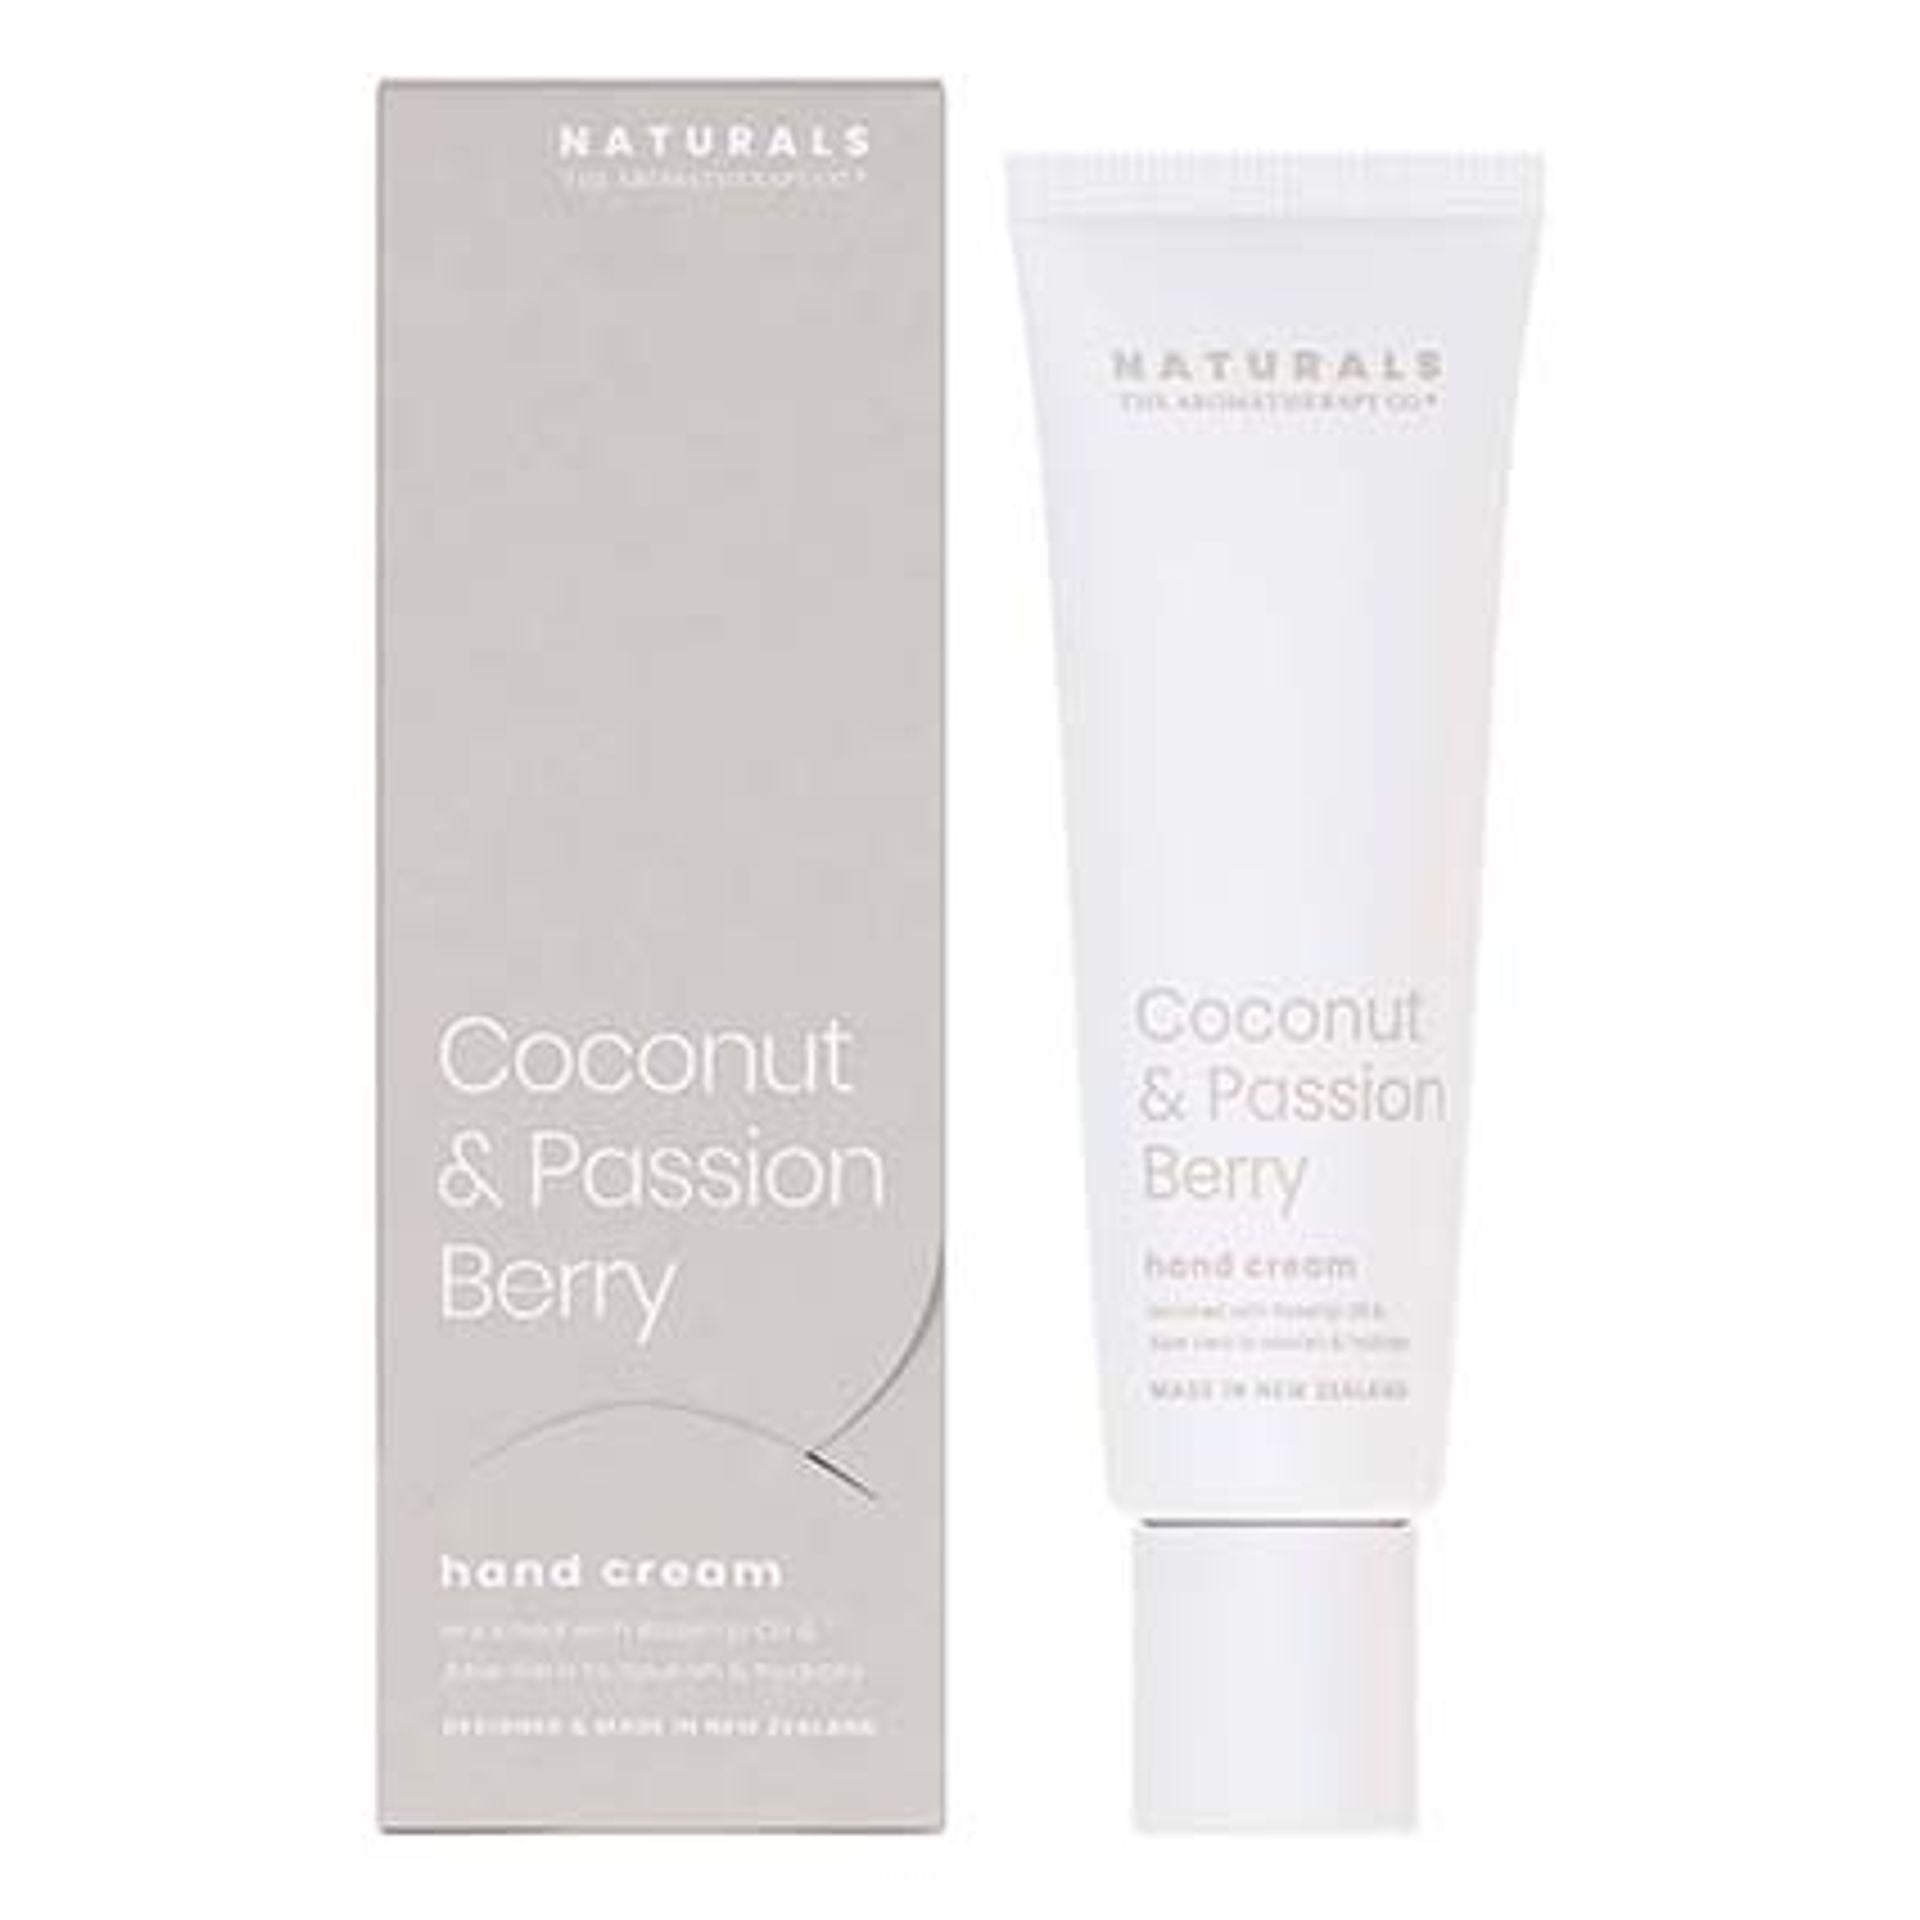 The Aromatherapy Co Naturals Coconut & Passion Berry Hand Cream